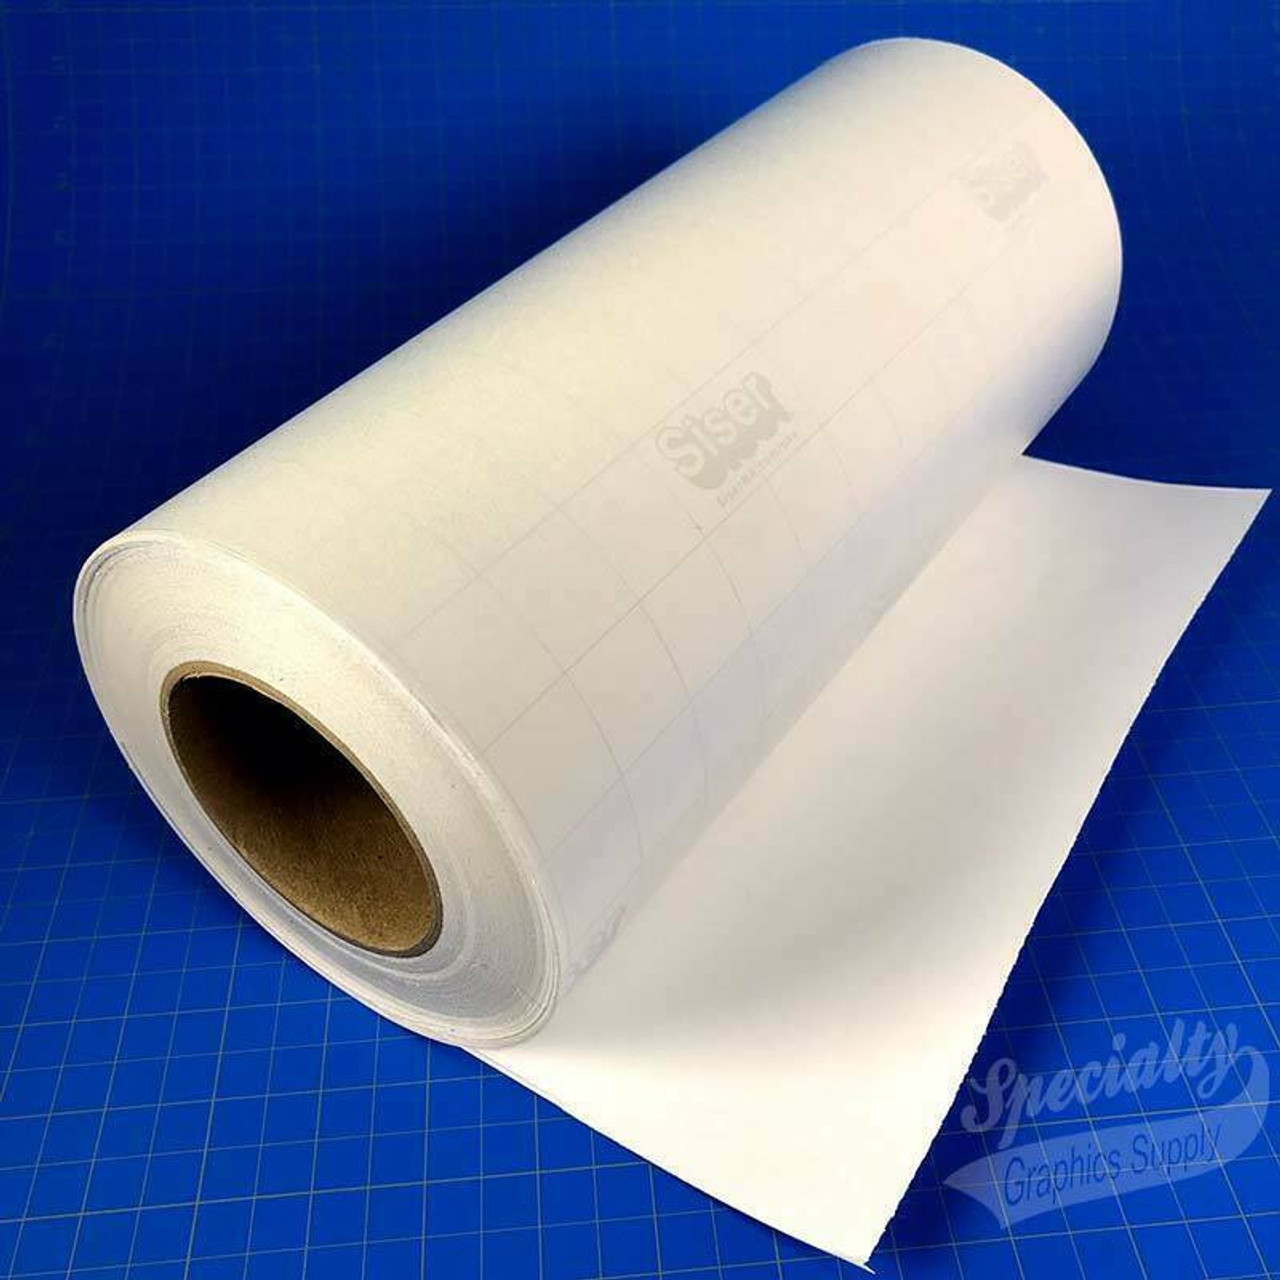 ORACAL 12 X 10' Feet Roll Clear Transfer Tape w/Grid for Adhesive